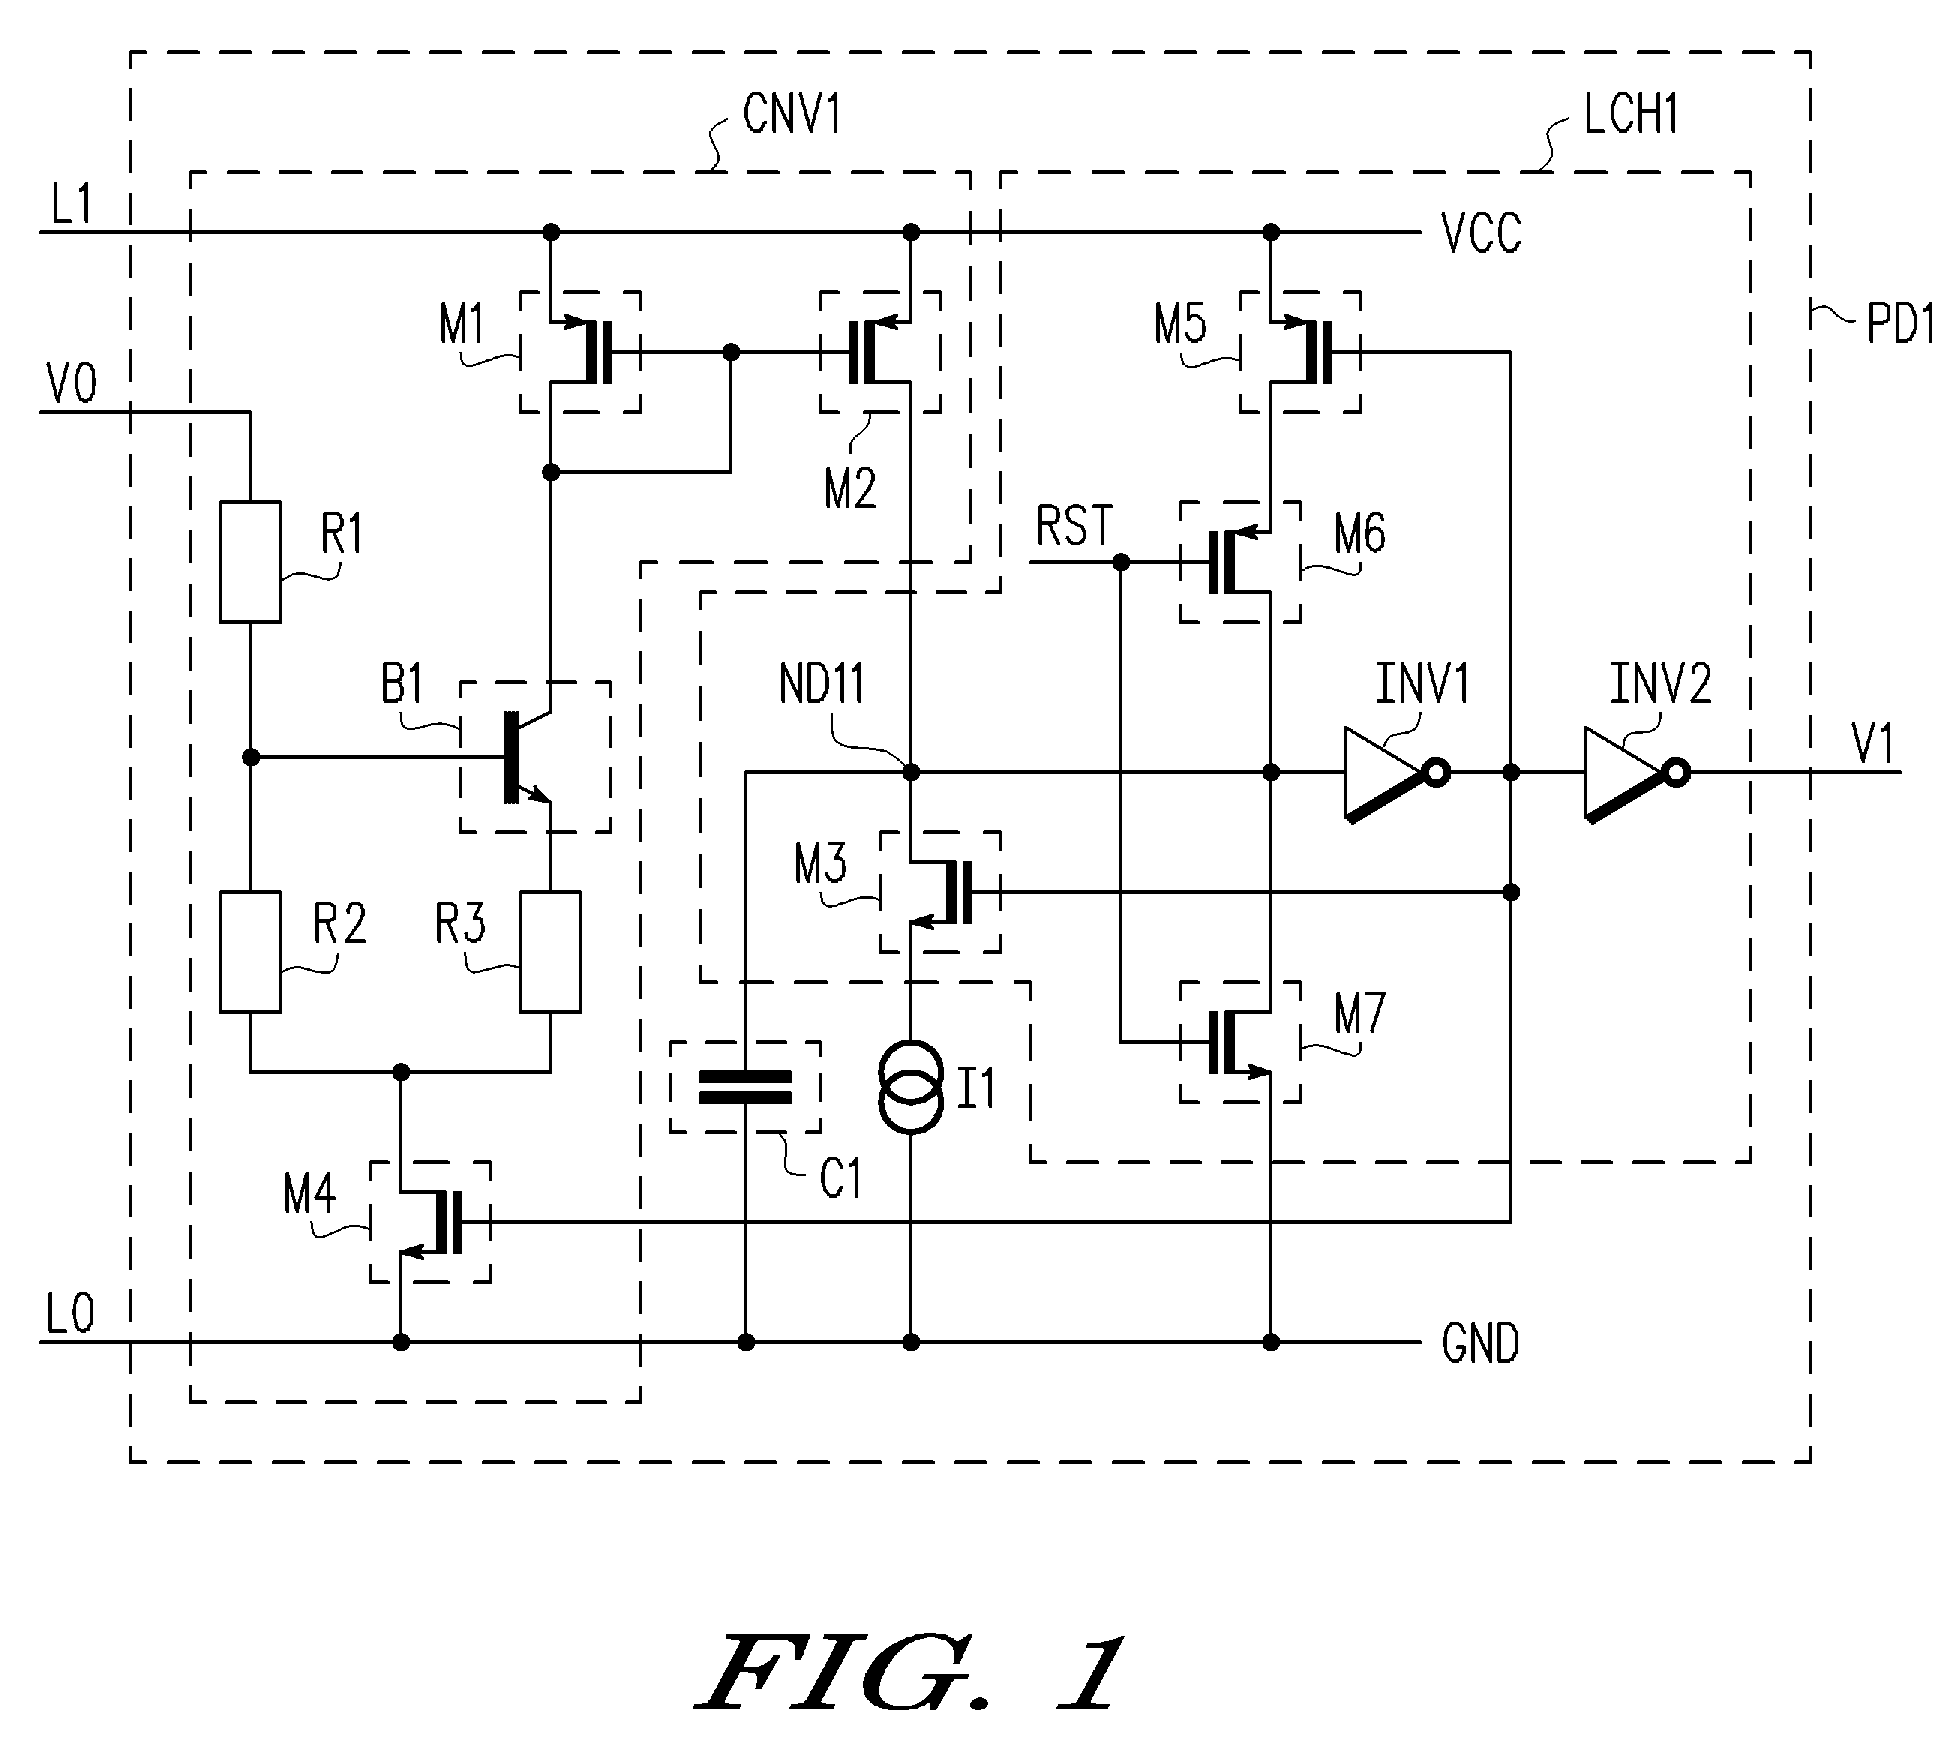 Power on detection circuit